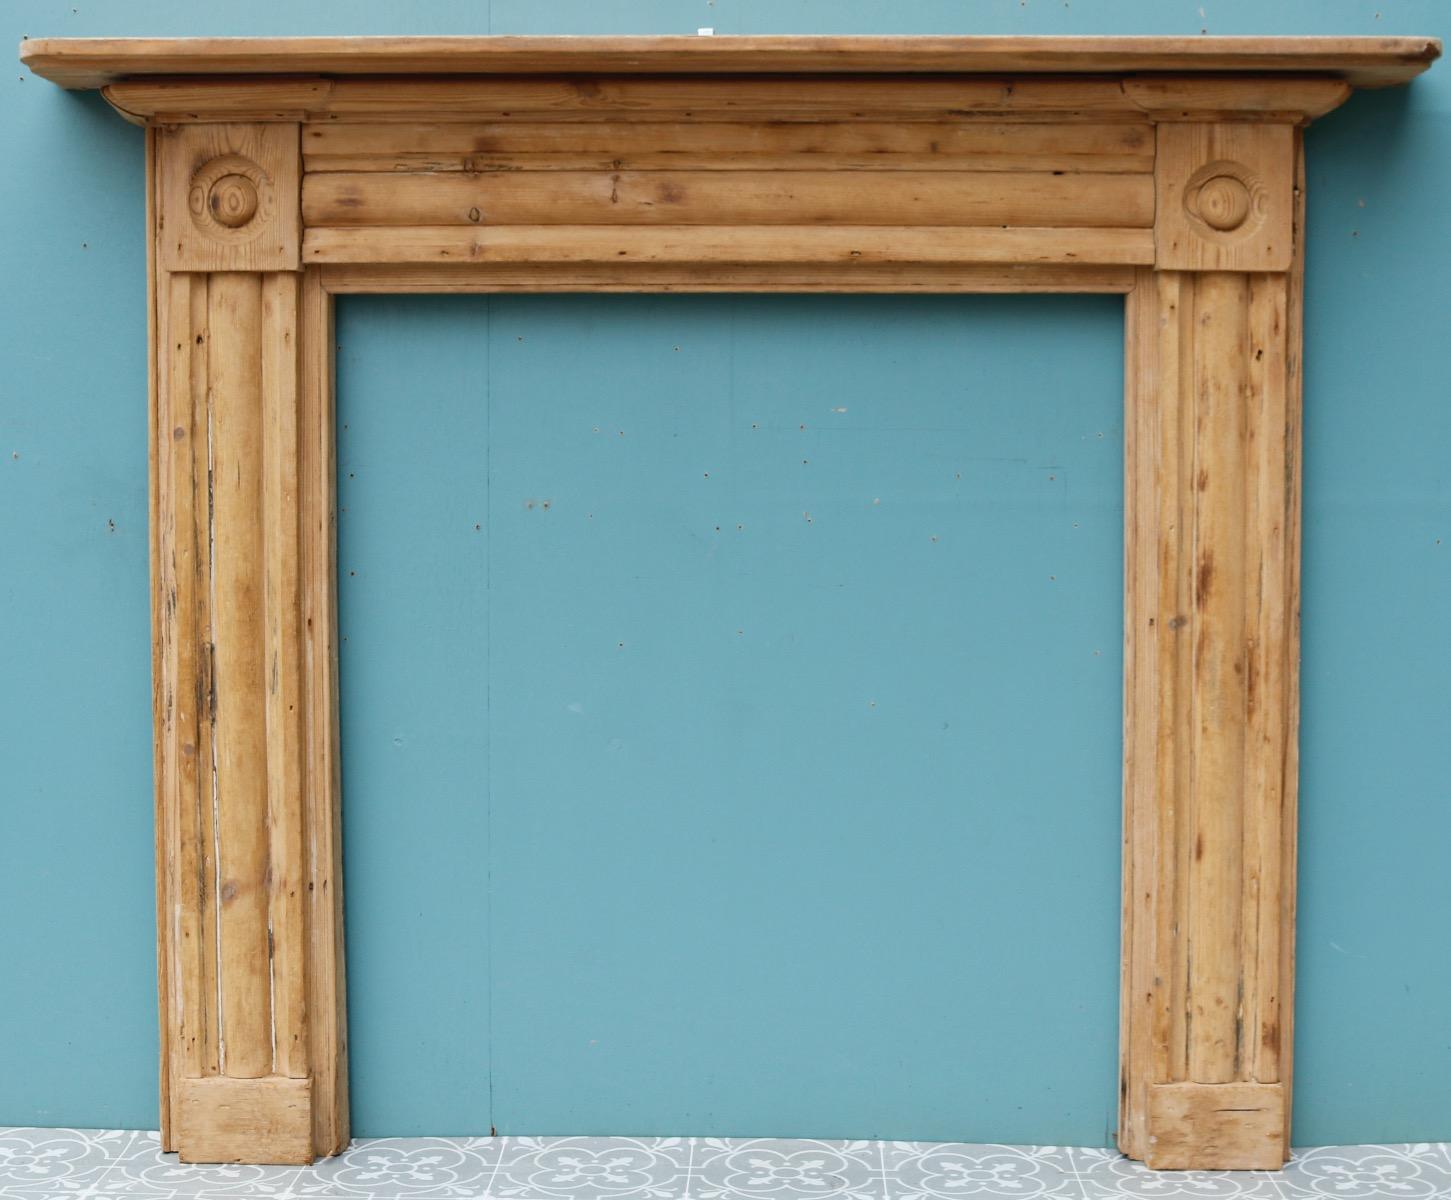 A Georgian period fire surround with carved ‘bullseye’ end blocks.

Additional dimensions 

Opening height 90.5 cm

Opening width 82.5 cm.

Width between outsides of the foot blocks 121 cm.